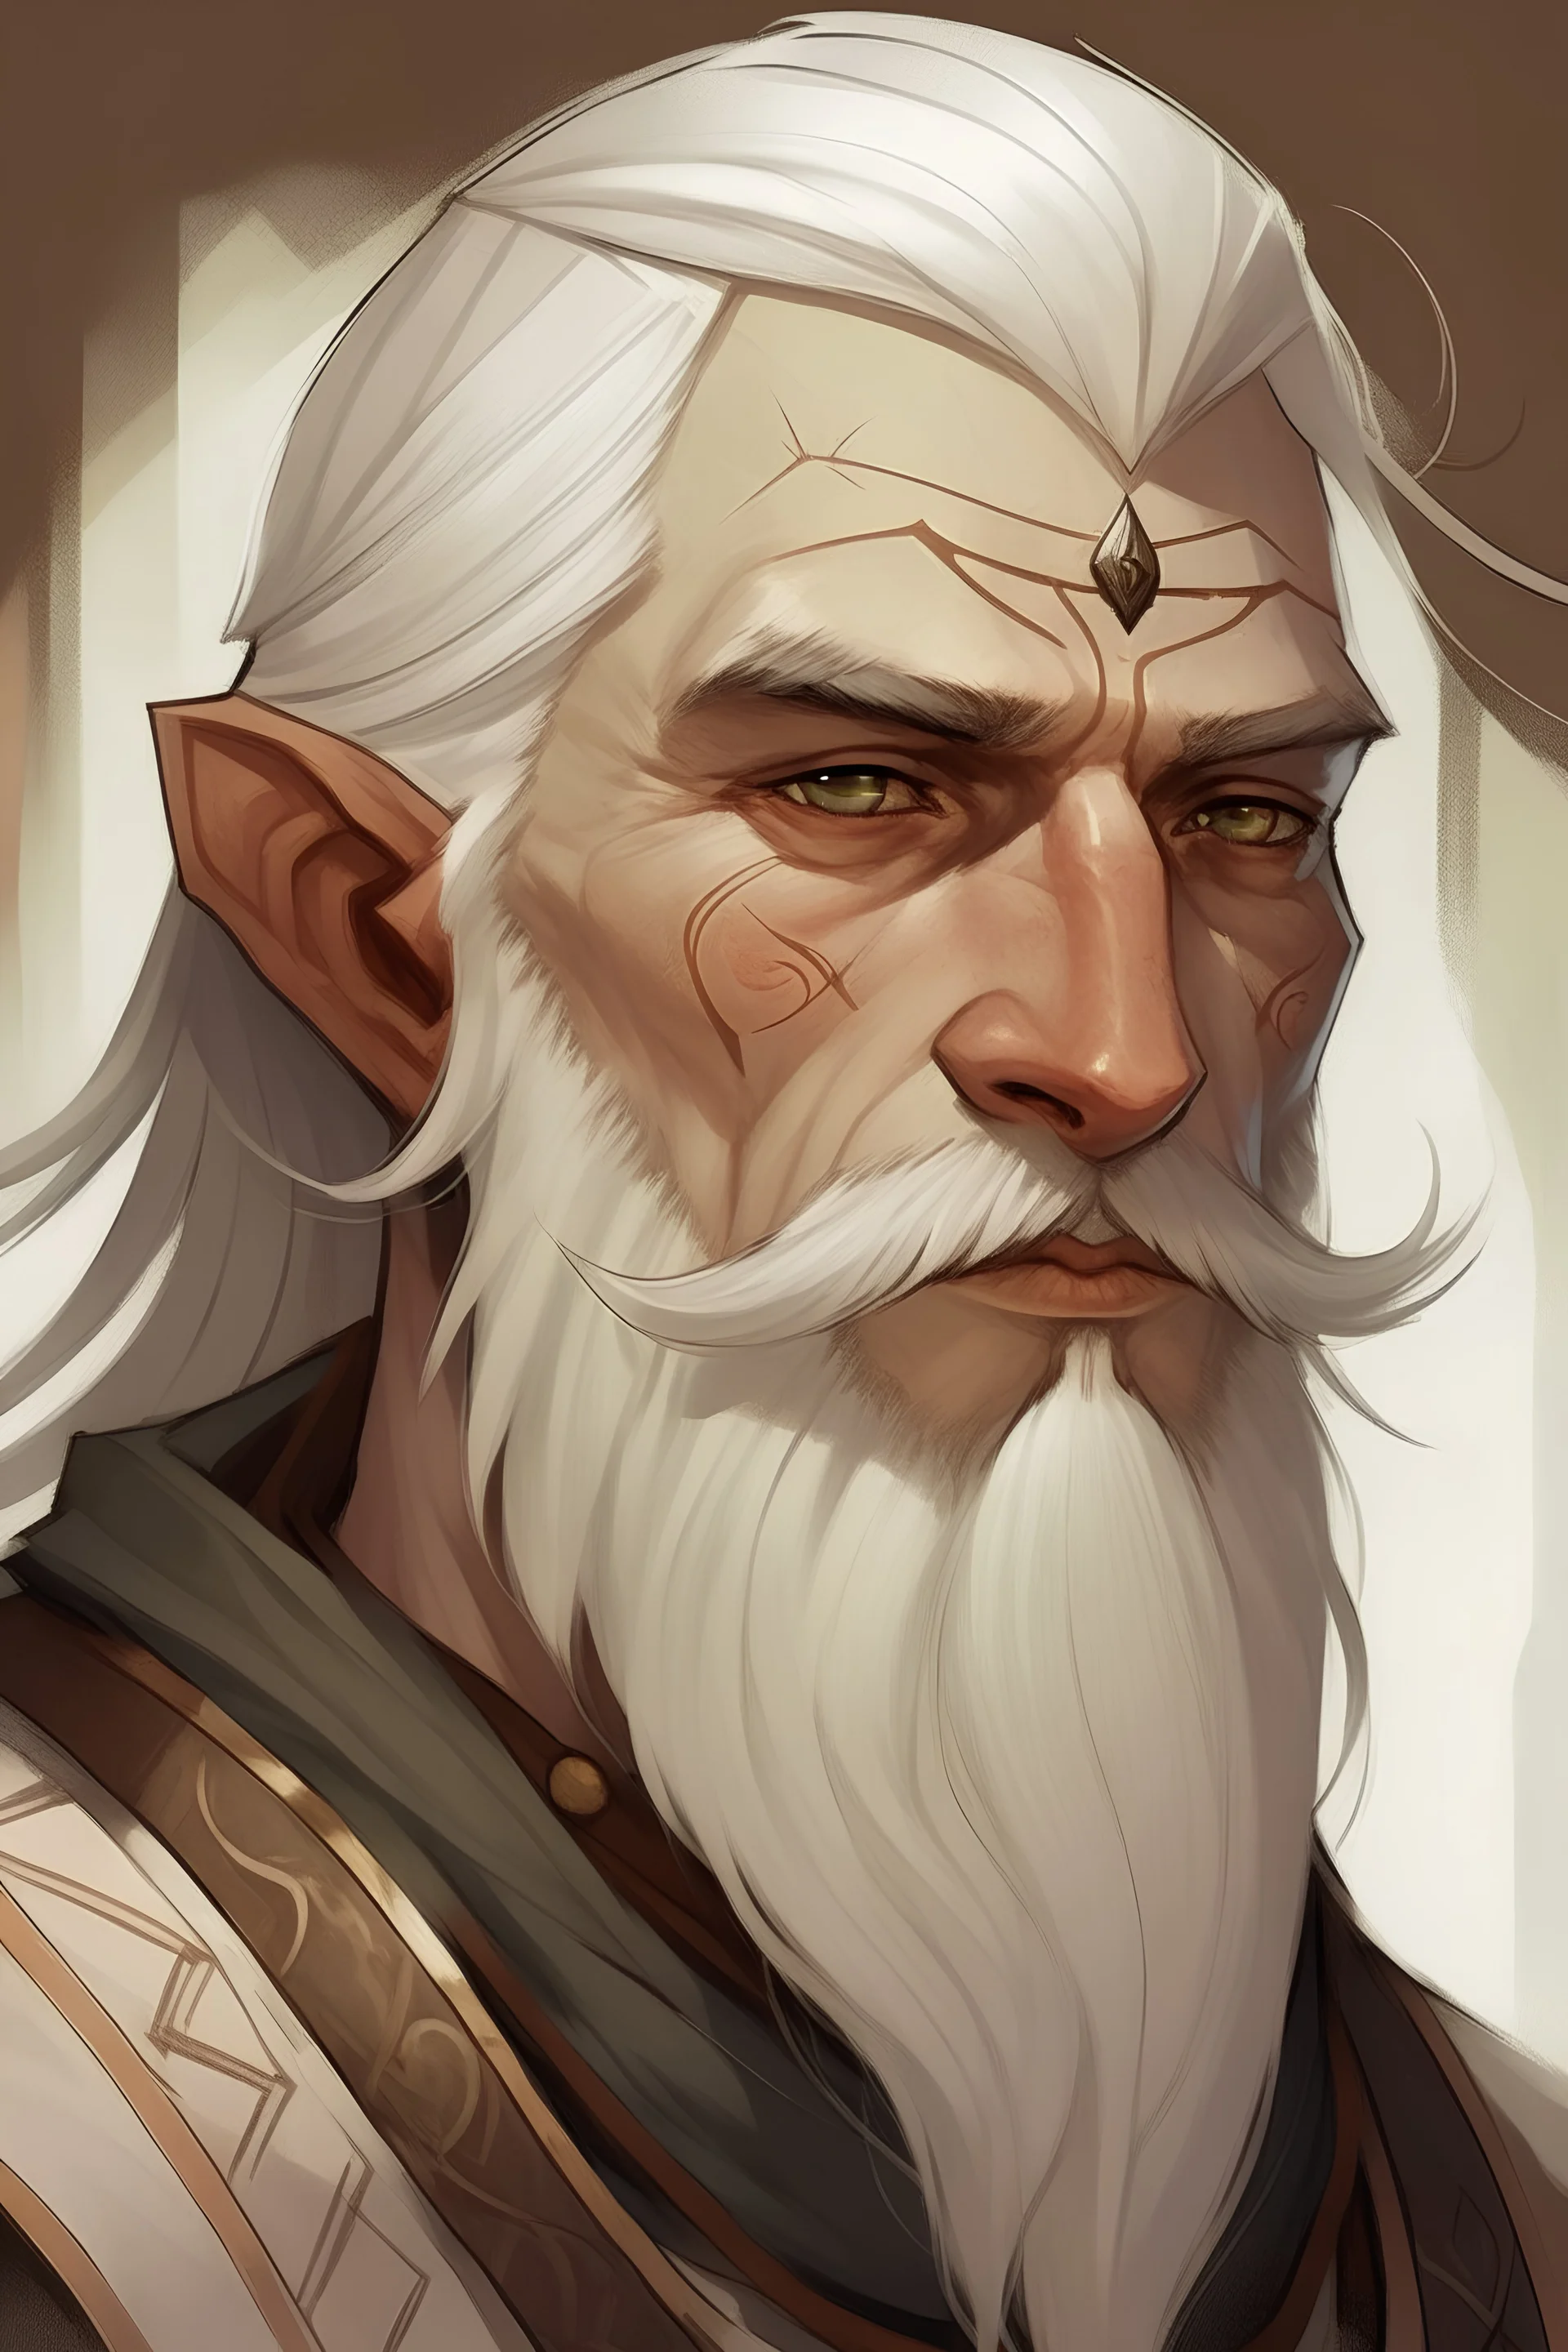 Dnd, portrait of an assimar who has tan skin, white hair and square beard